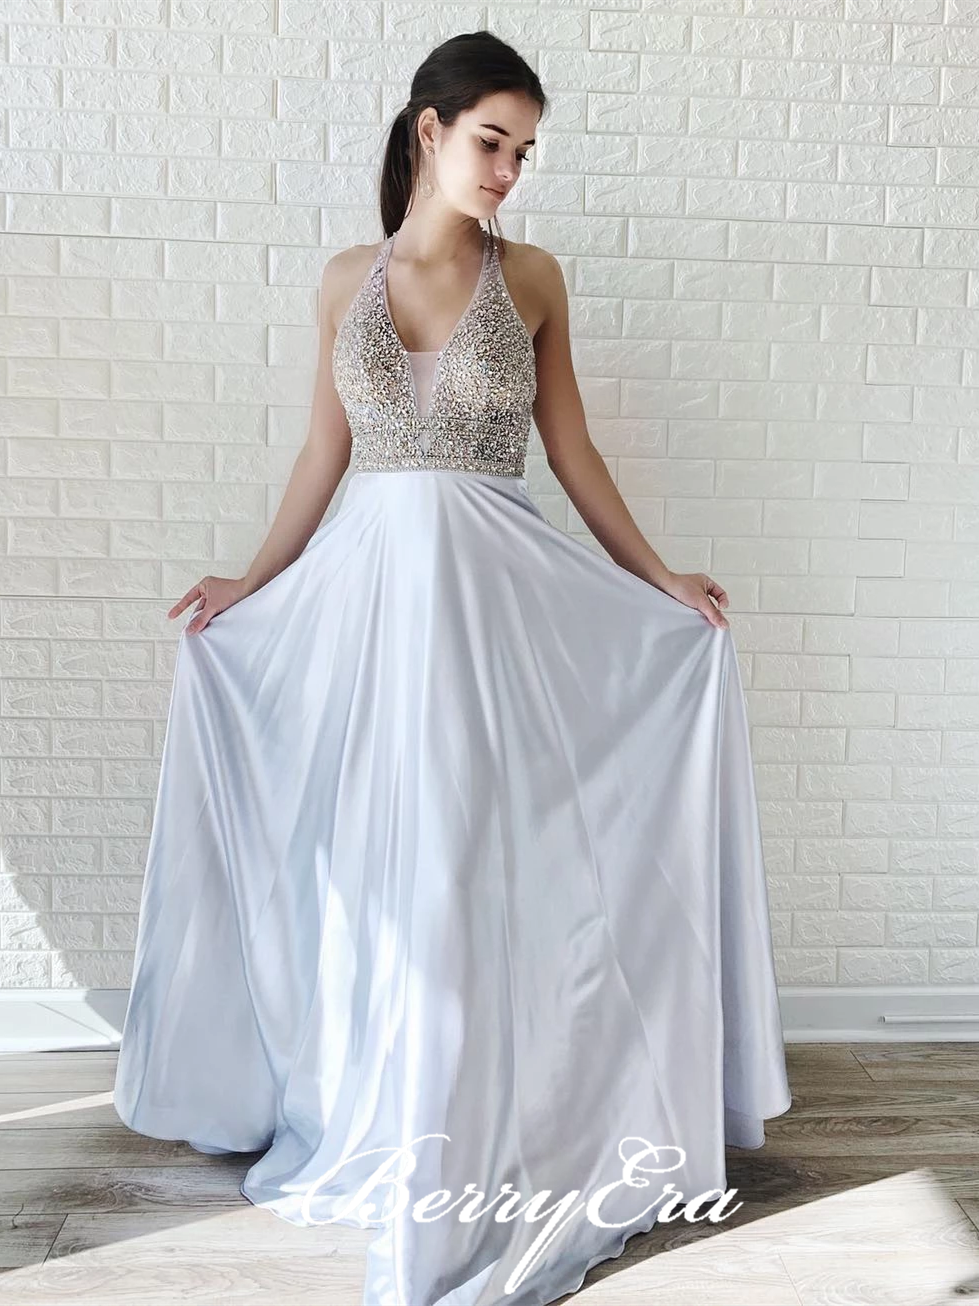 Halter Beaded Top A-line White Satin Prom Dresses, Backless Long Prom Dresses, Newest Prom Dresses